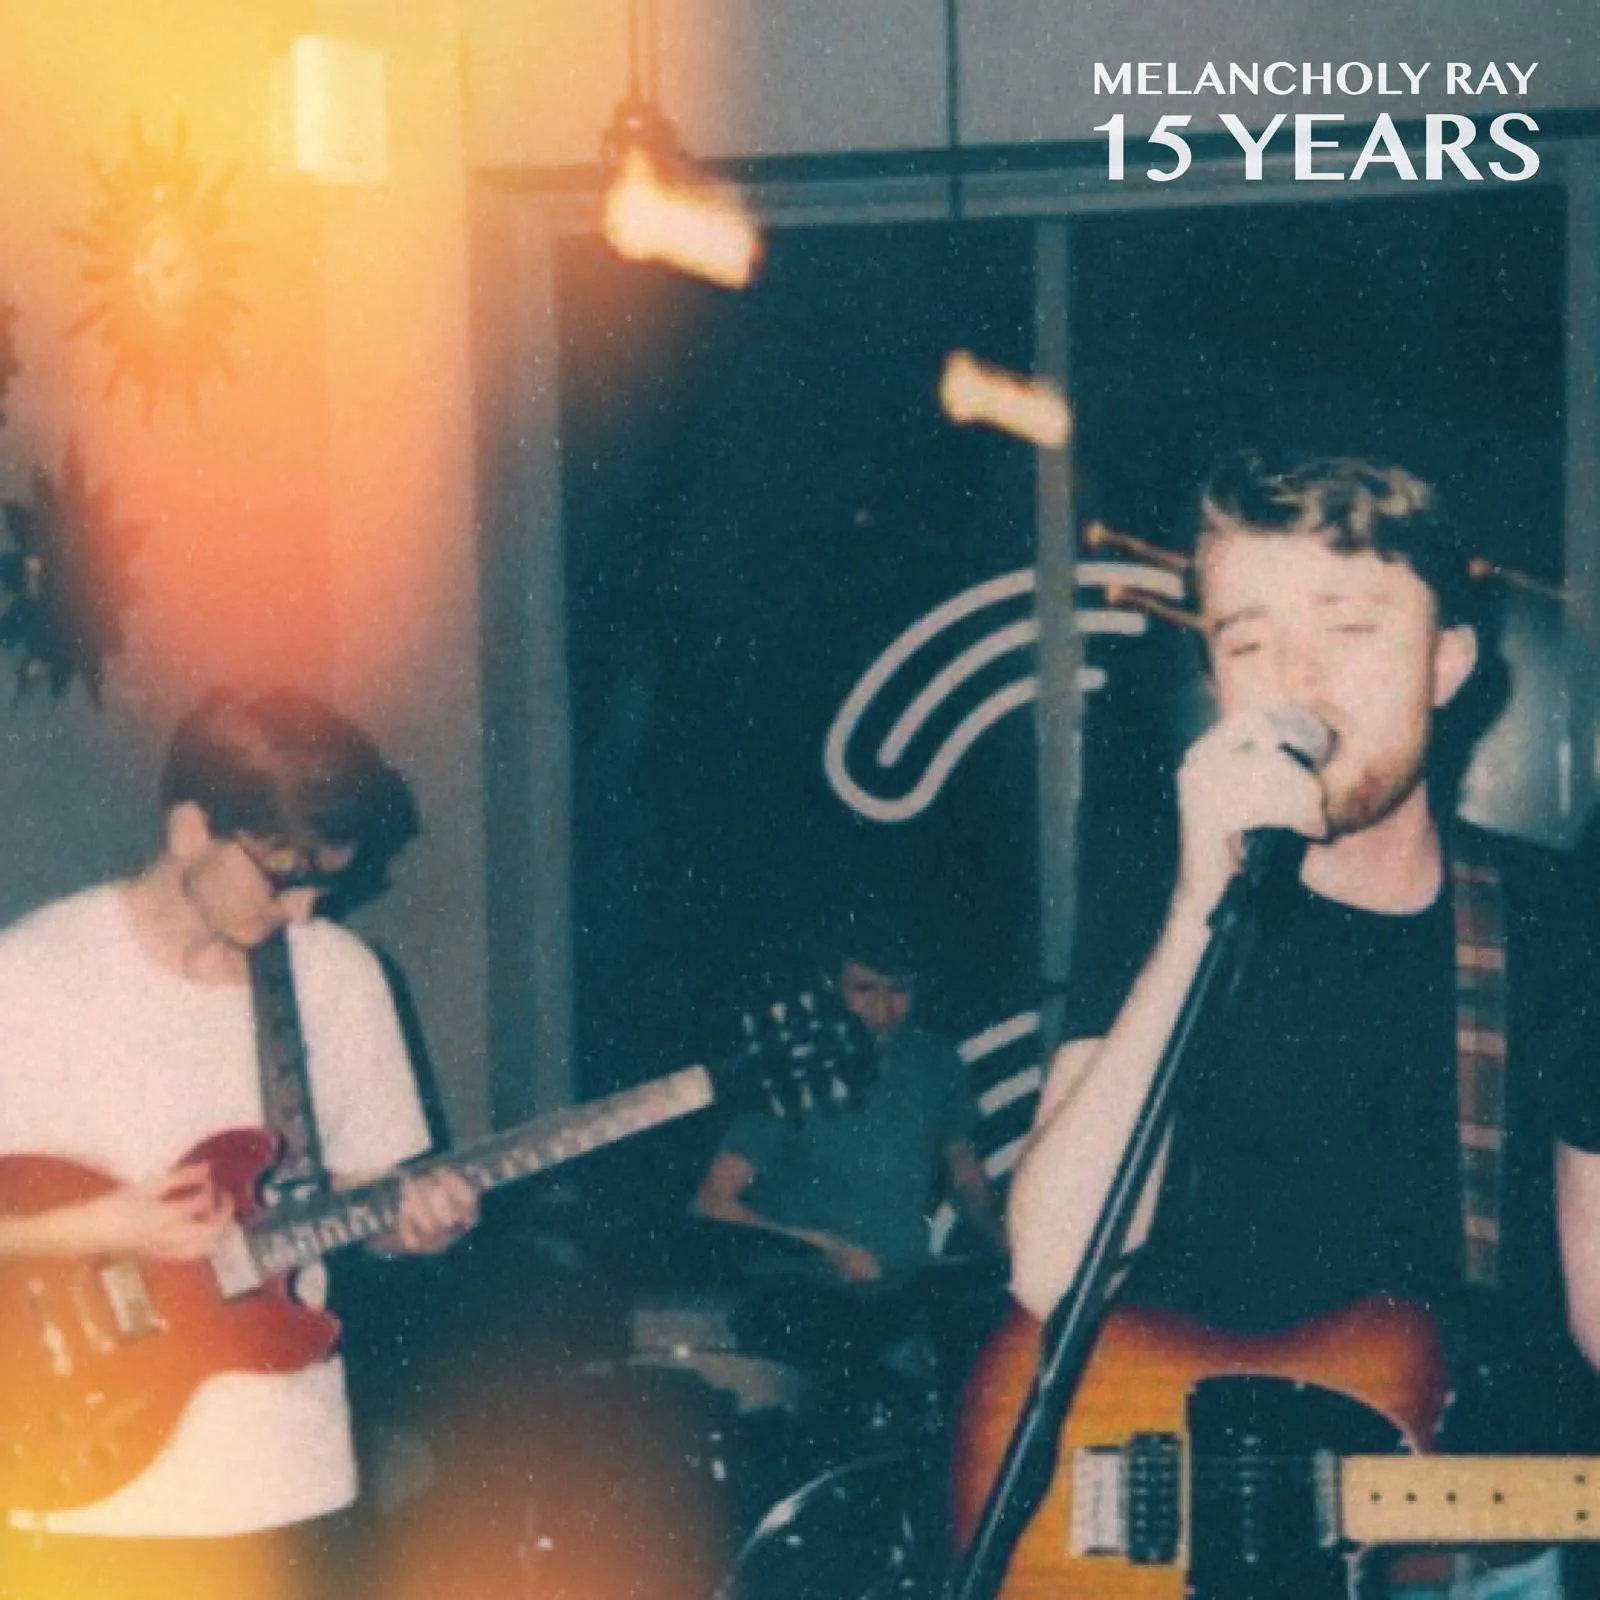 TRACK PREMIERE: Melancholy Ray drop their newest single ’15 Years’ today